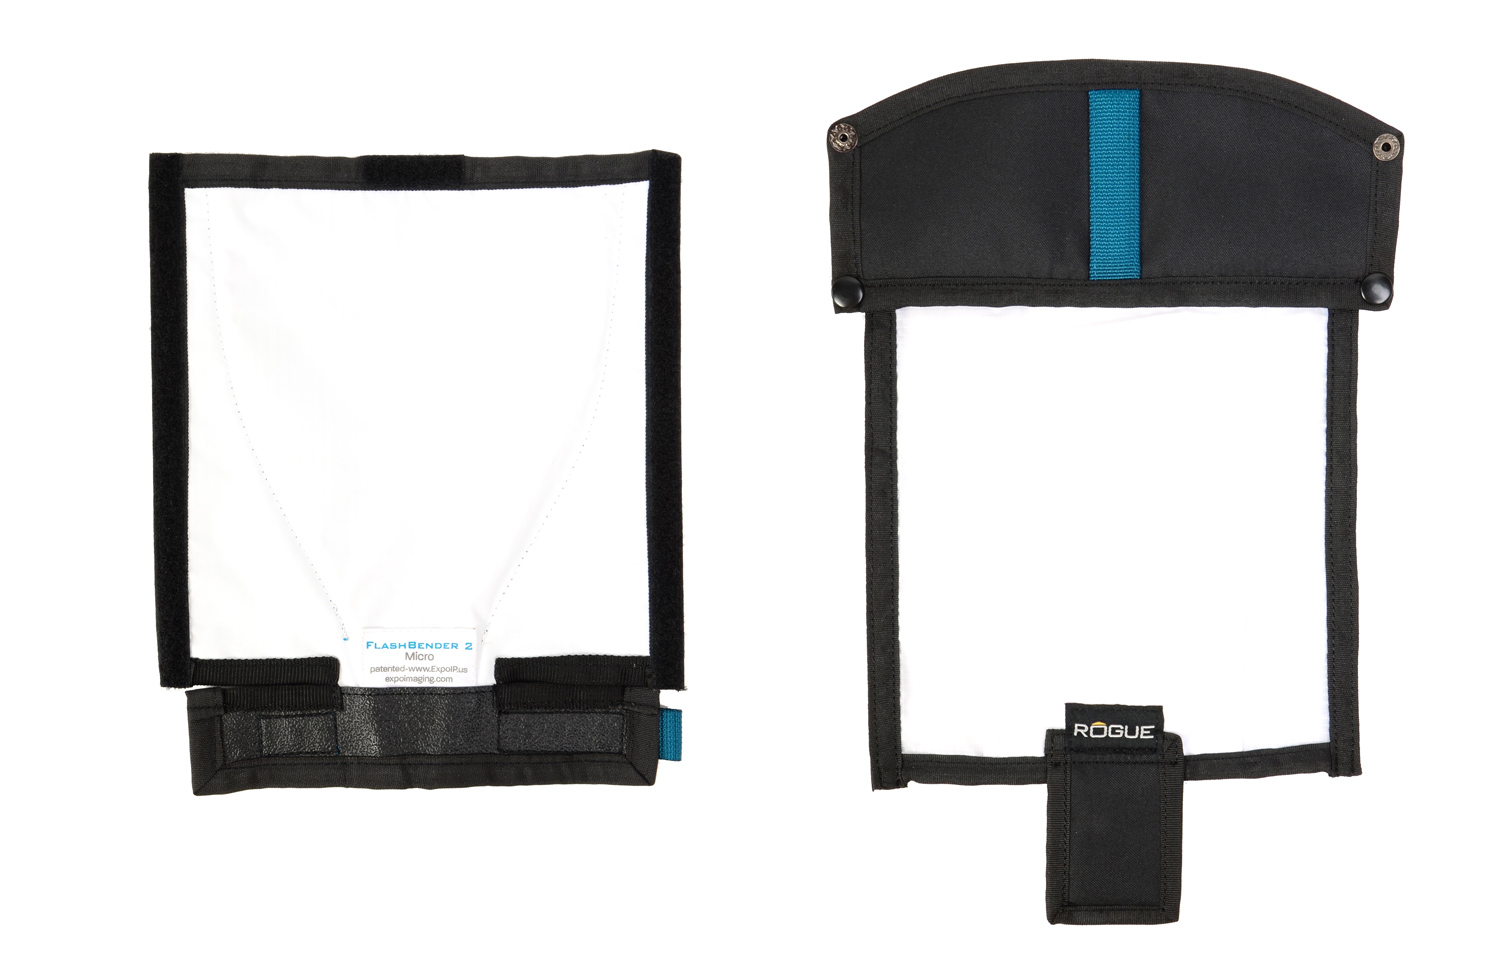 FlashBender 2 Mirrorless Soft Box Kit makes a soft box with the included Reflector and Diffusion Panel